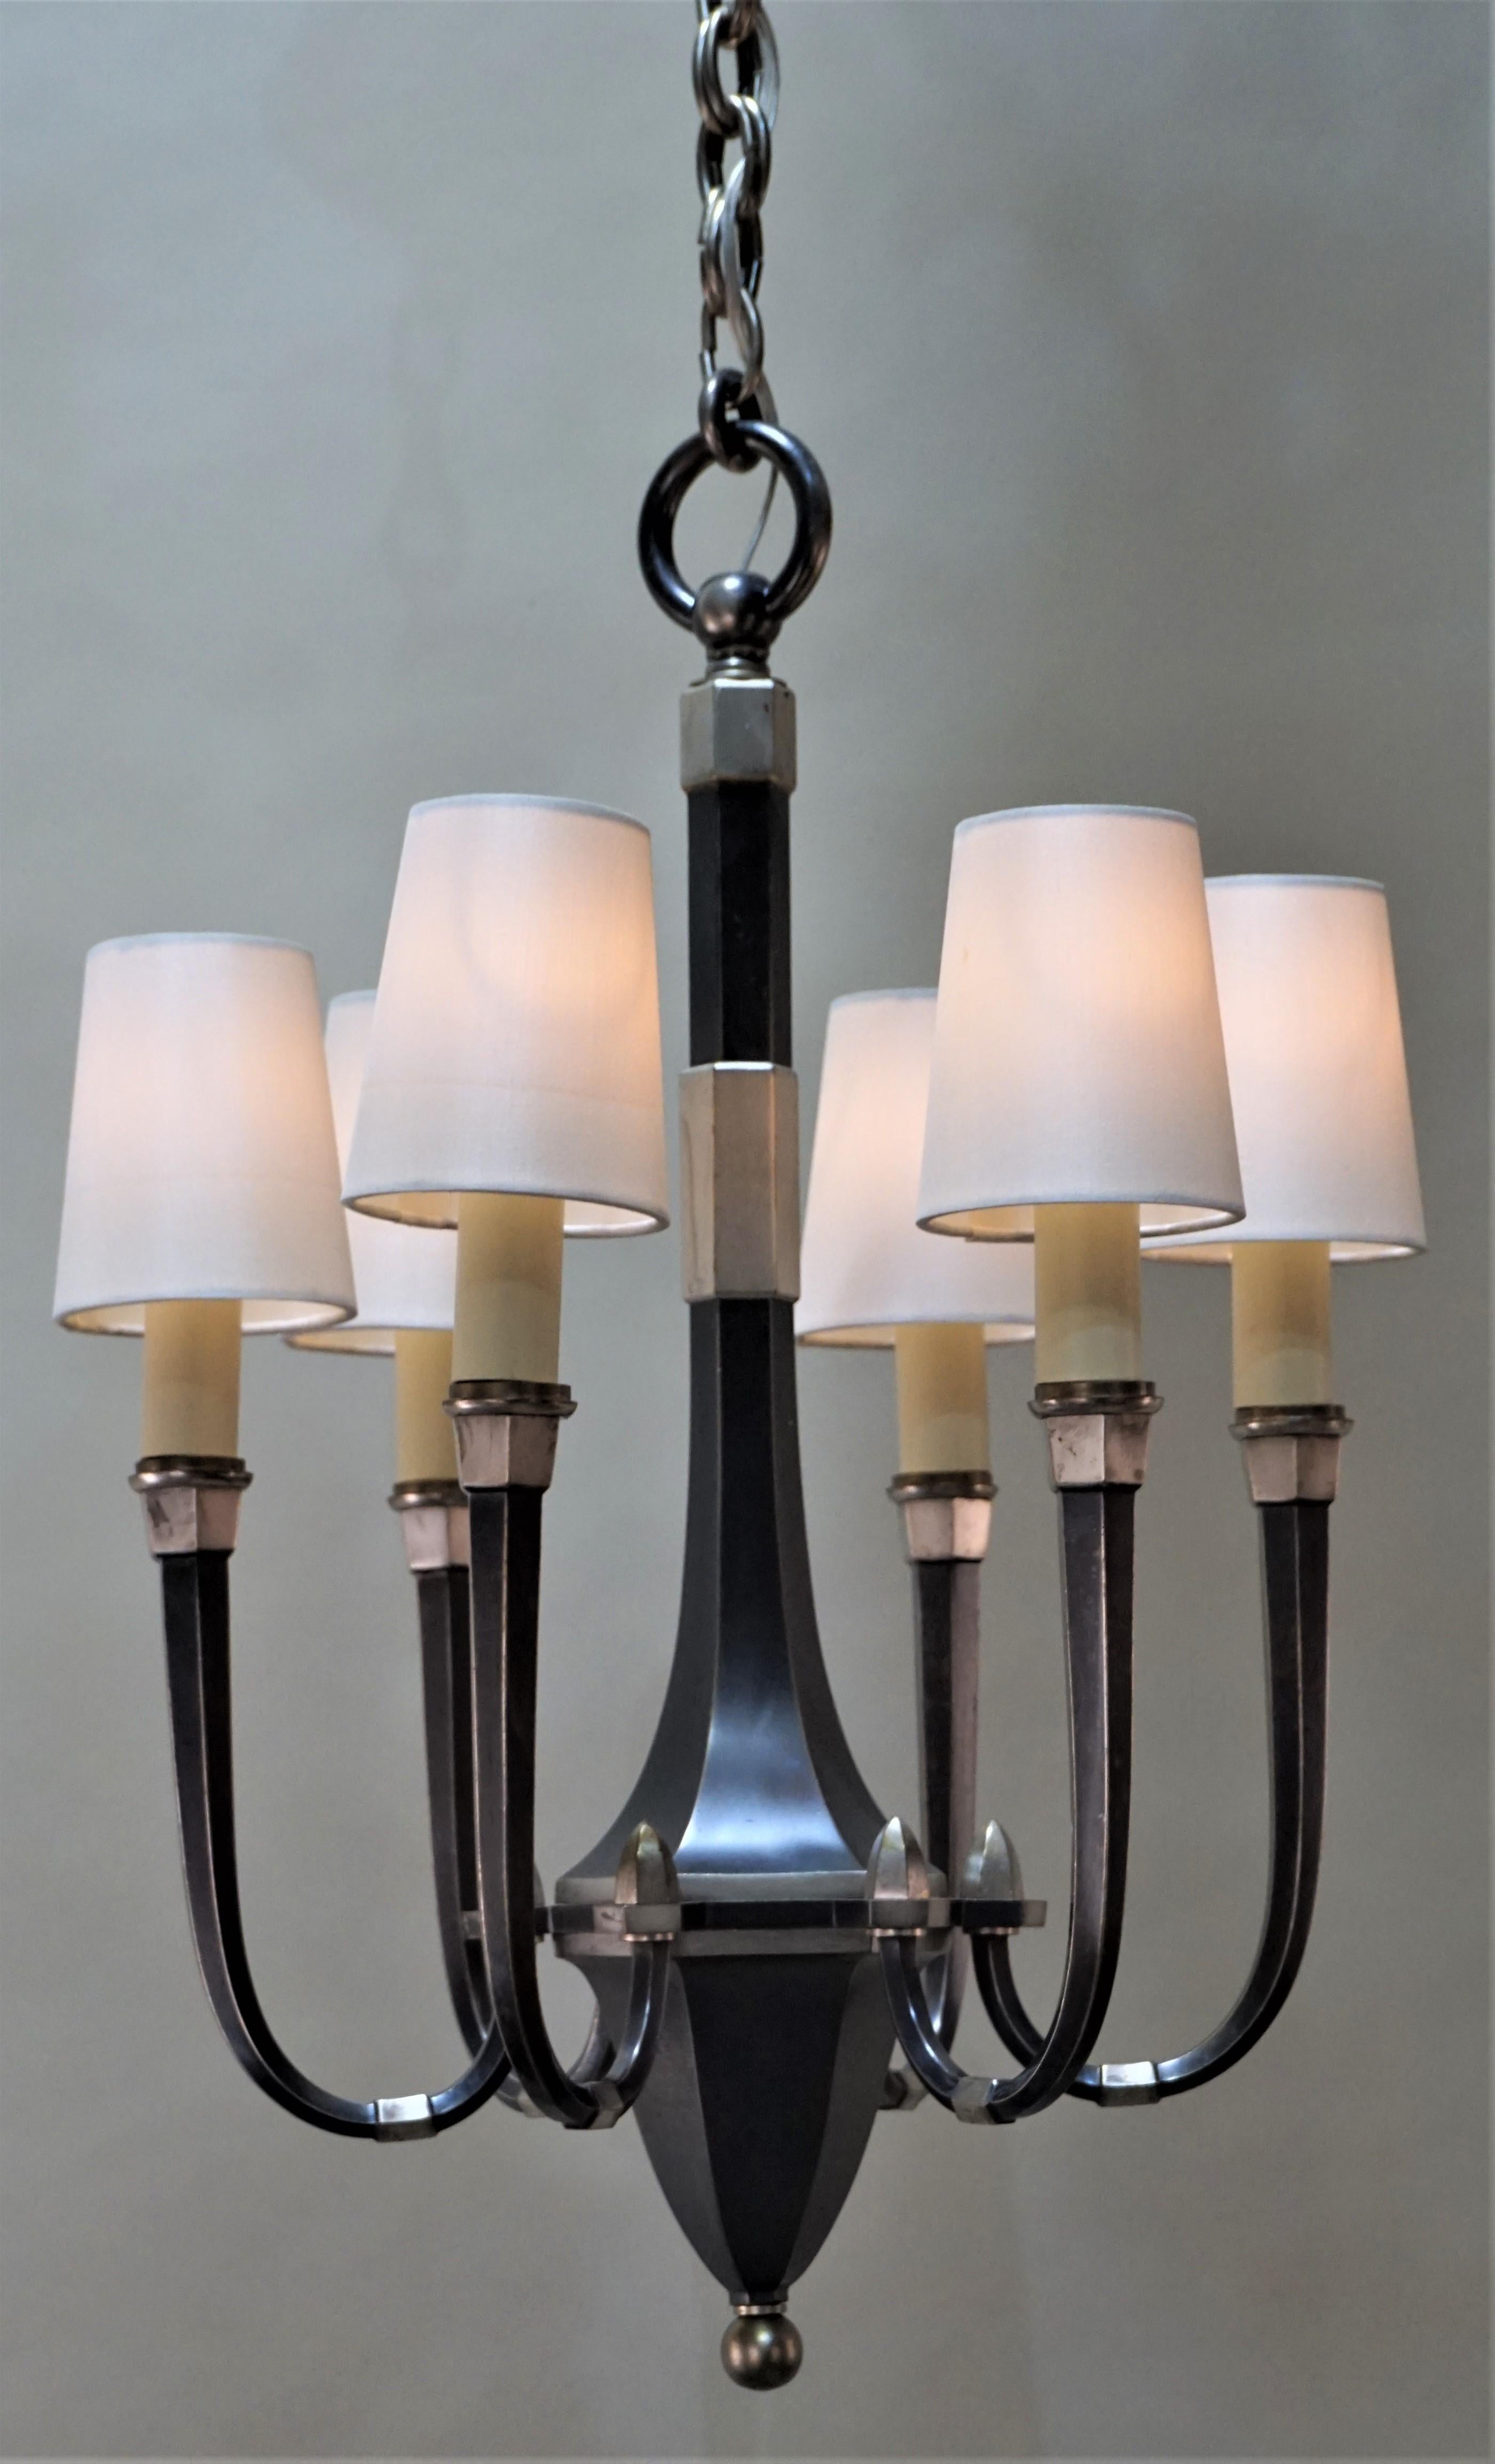 Simple but elegant two-tone silver on bronze Art Deco chandelier.
The minimum height fully installed with 1 link of chain is 32